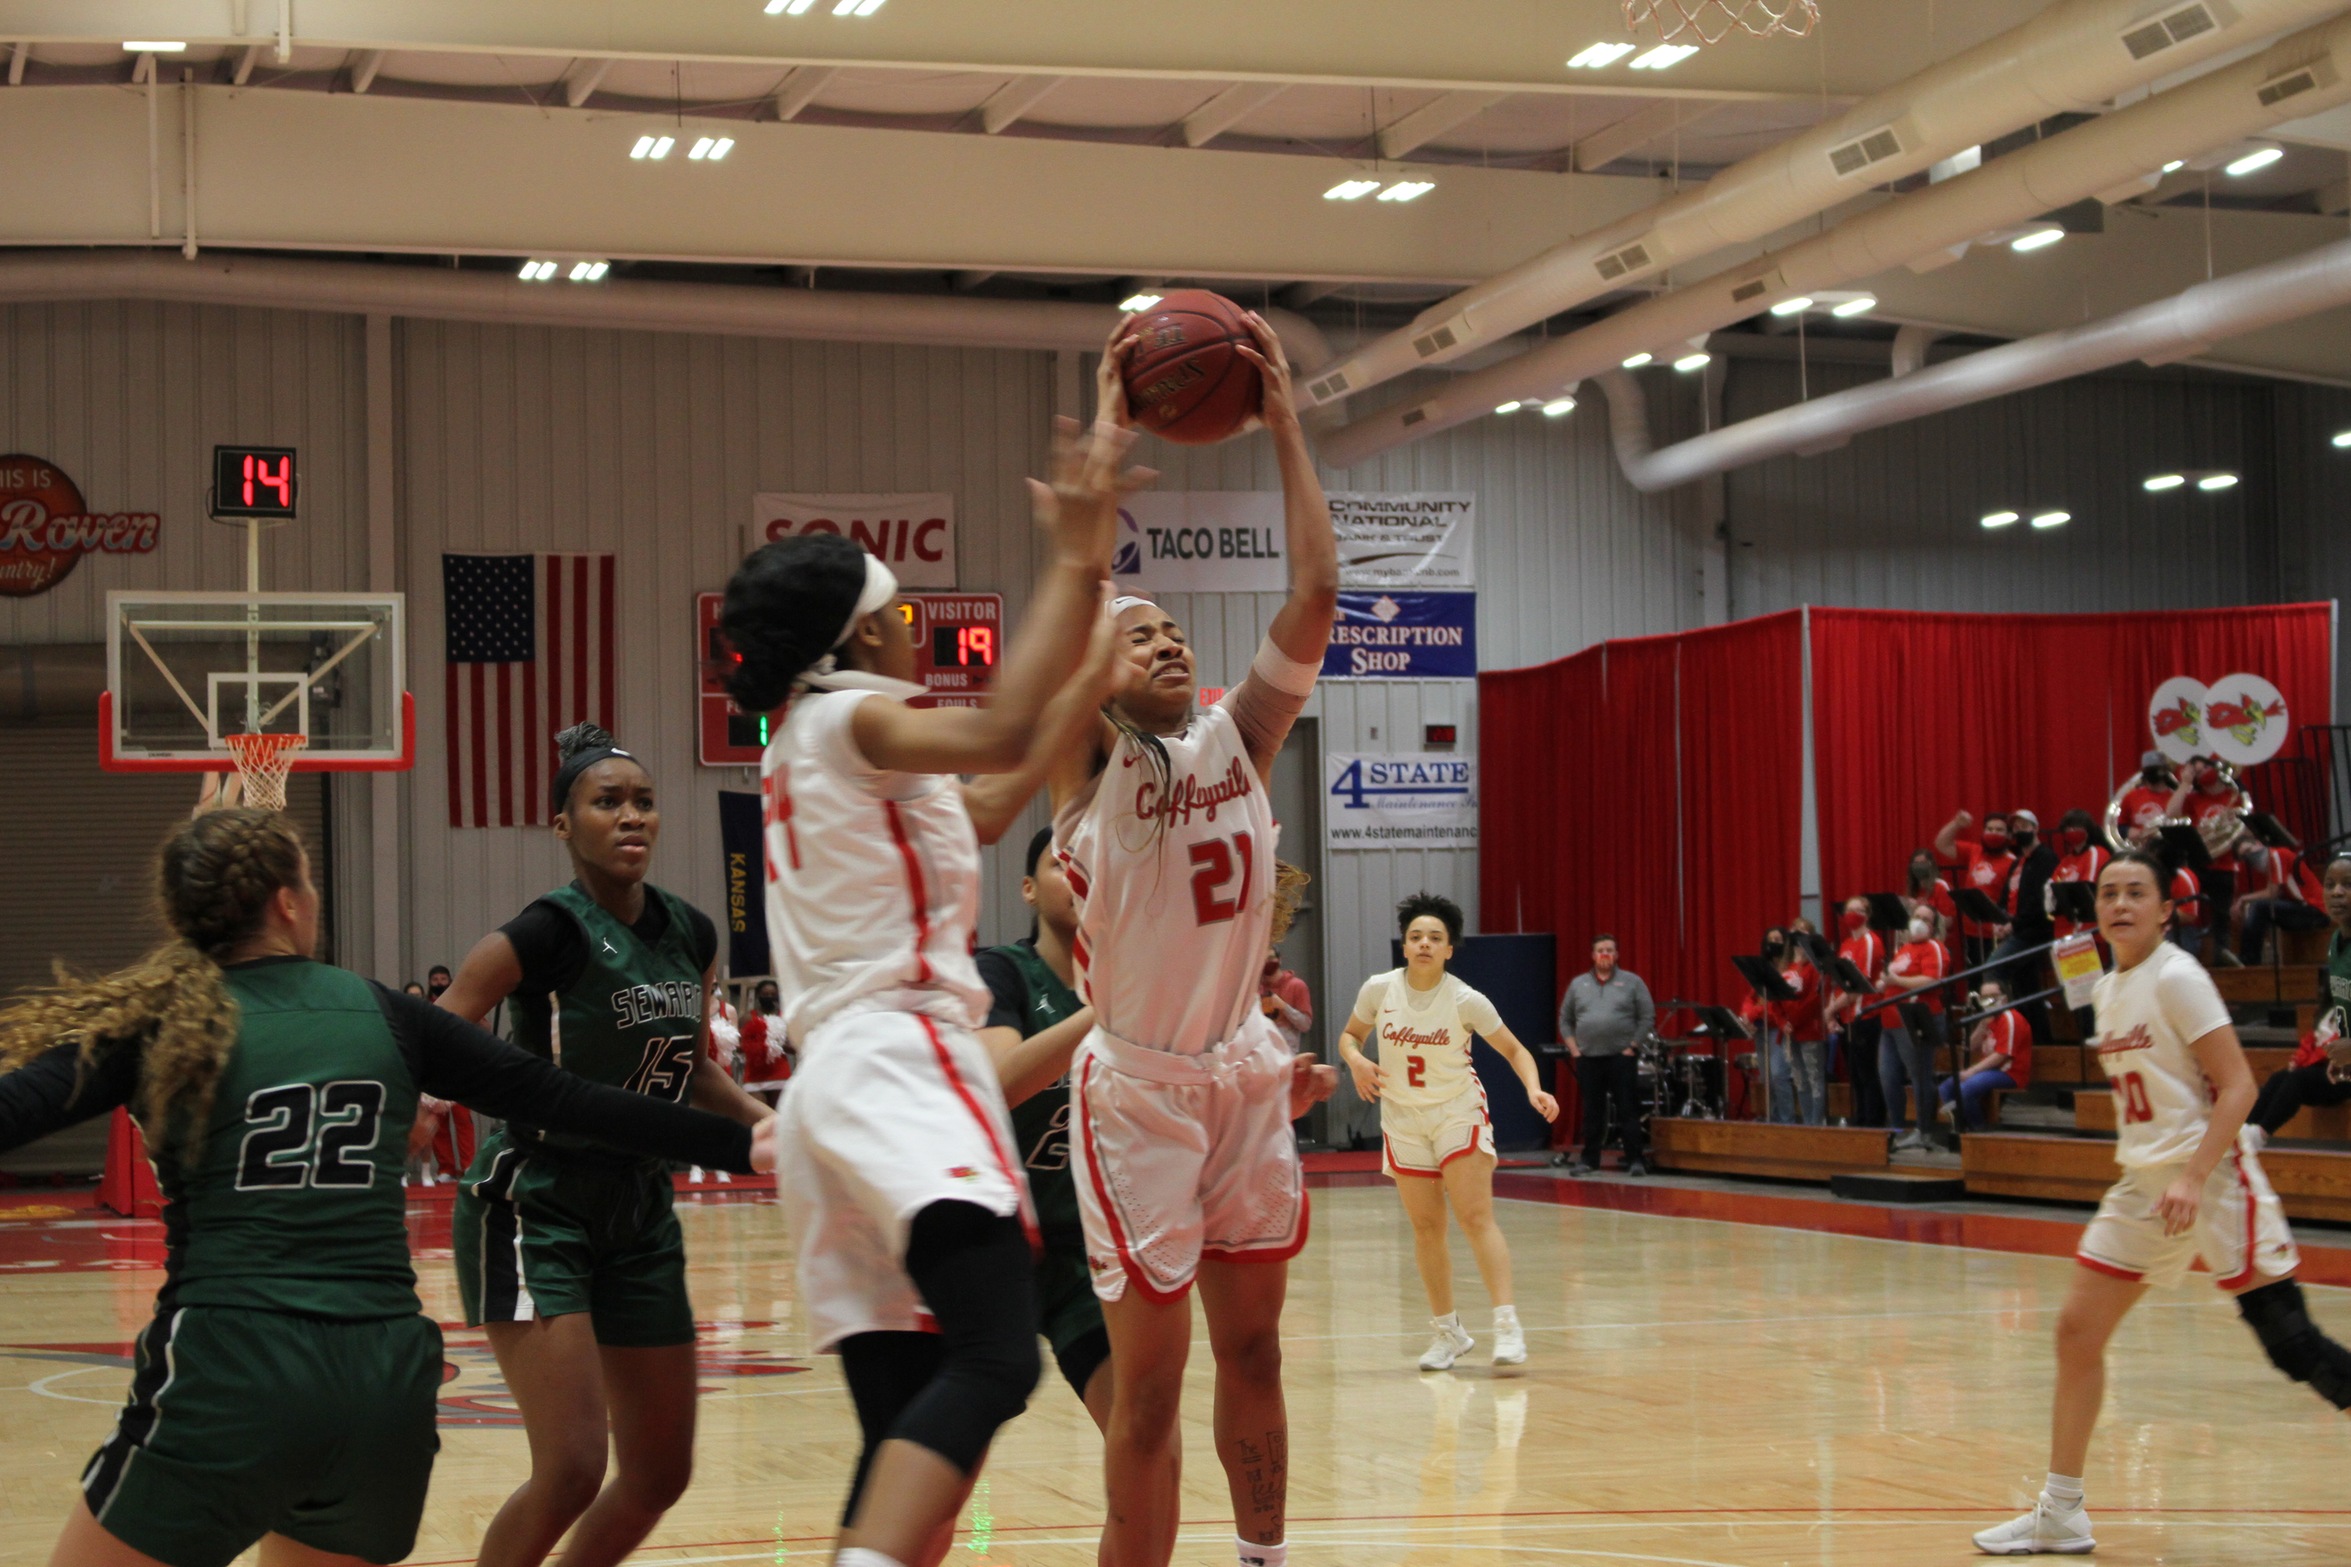 A 63-54 Home Loss vs Seward Moves Raven Women's Basketball to an Overall Record of 3-2